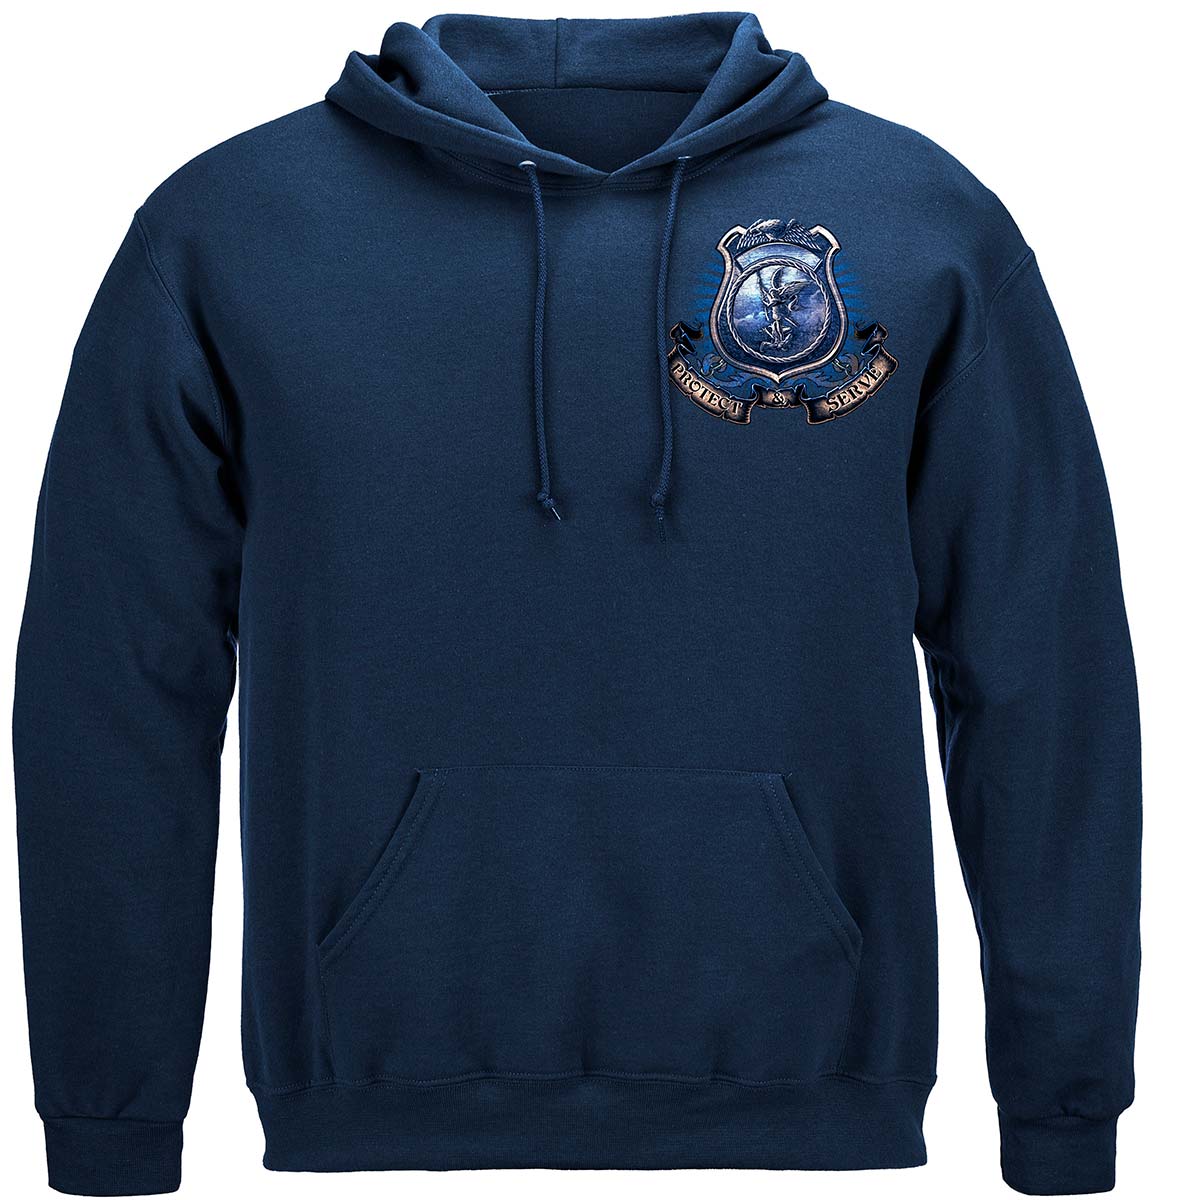 Police Coat of Arms Premium Hooded Sweat Shirt